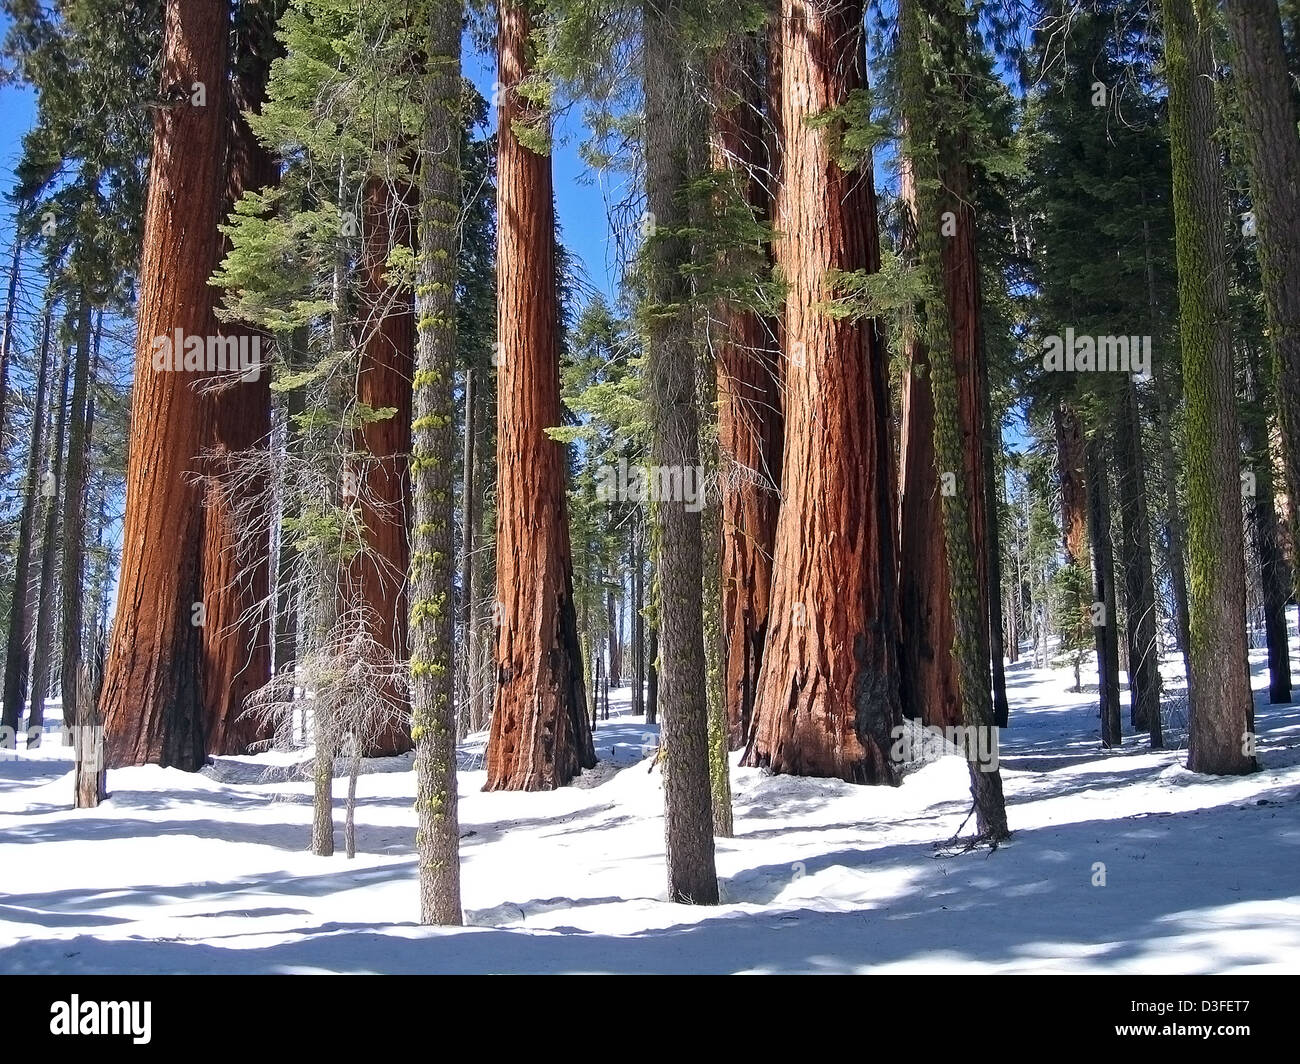 A grove of giant sequoia trees in winter. Stock Photo